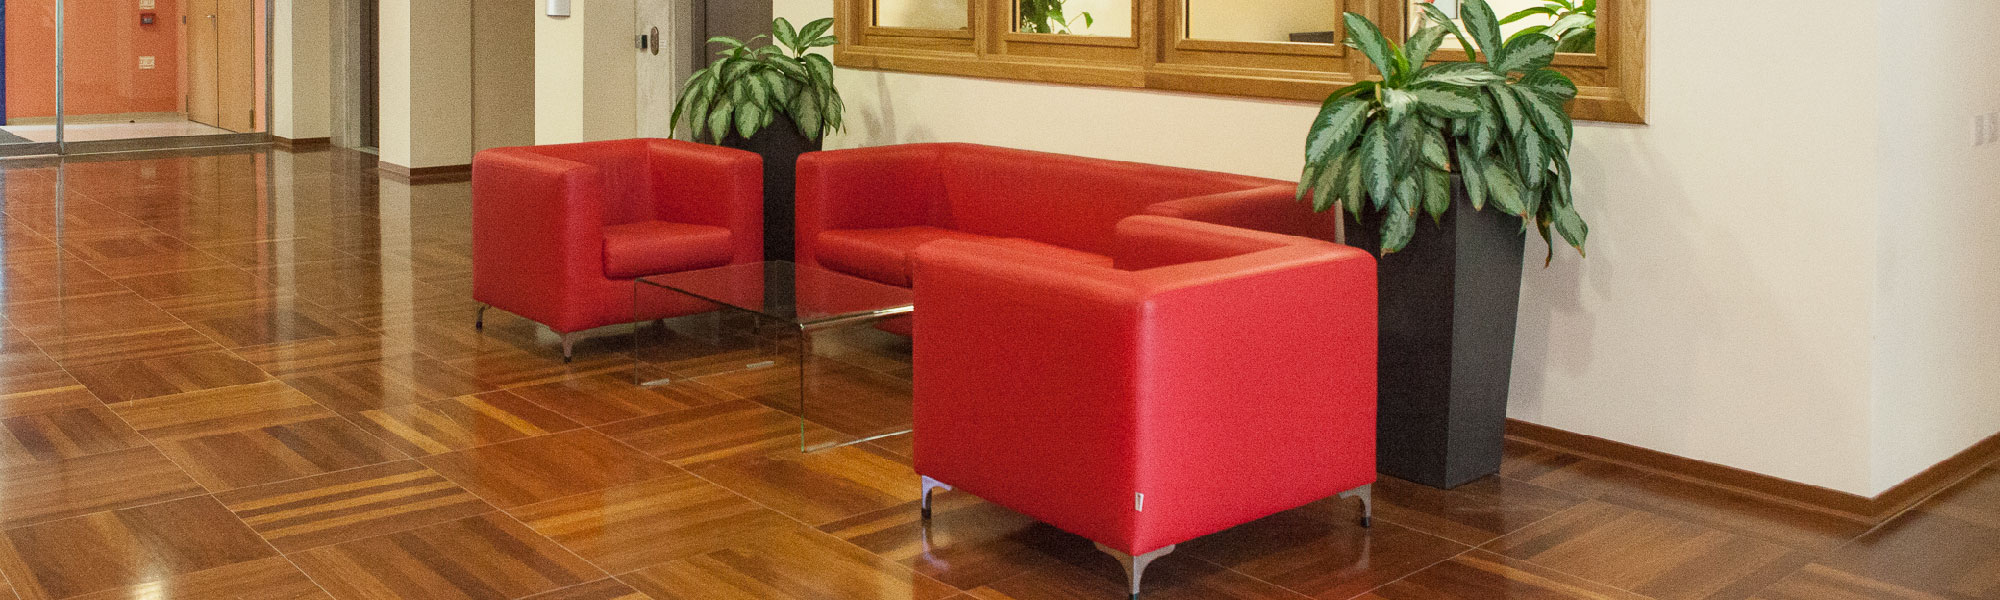 IT Services Reception showing the red sofas